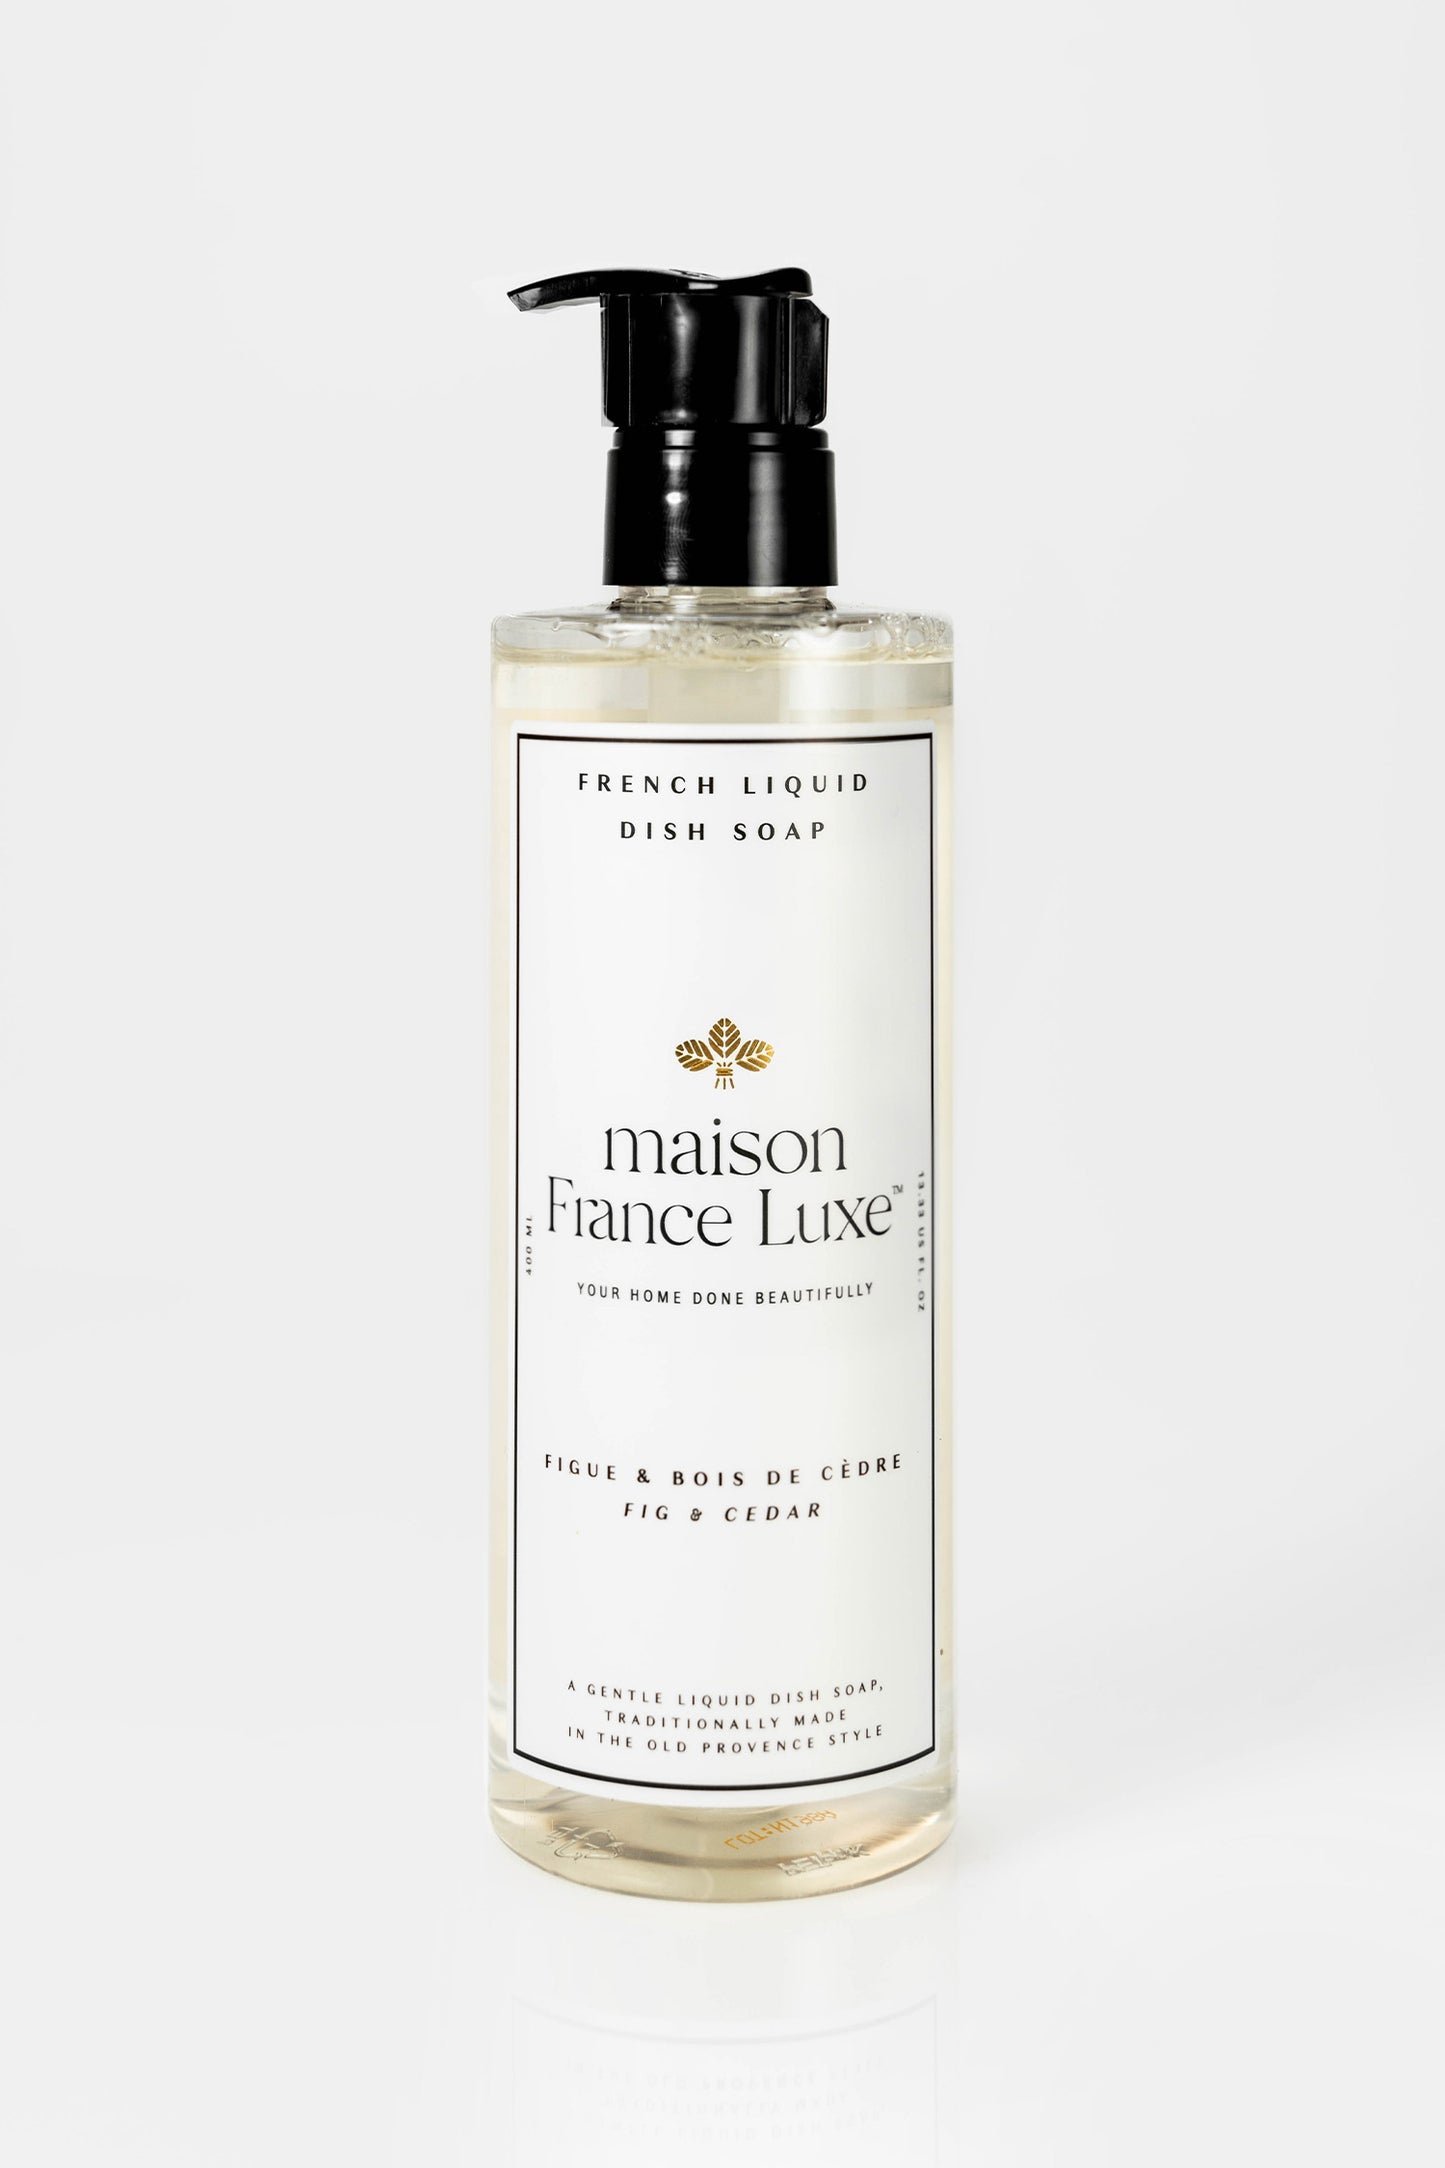 Natural Dish Soap, Fig & Cedar scent, made in France